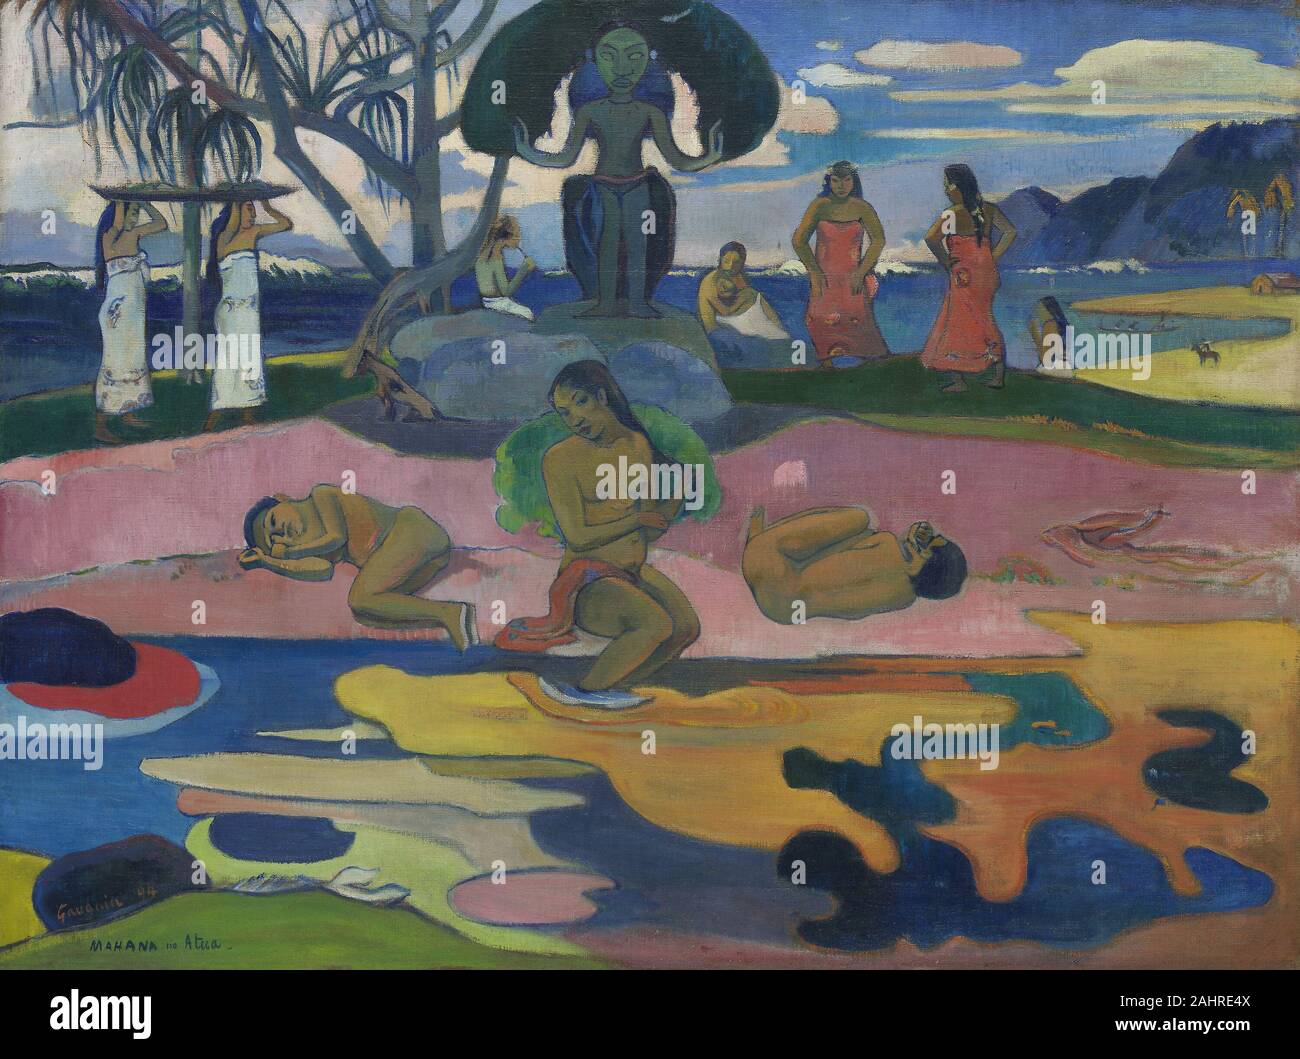 Paul Gauguin. Mahana no atua (Day of the God). 1894. France. Oil on linen canvas Day of the God is one of a small number of paintings of Tahitian subjects that Paul Gauguin made in France between his stays in the South Pacific. An imaginary rather than realistic depiction of the South Seas, it is dominated by an idol of the goddess Hina. To the right of her, women dance the upaupa, a suggestive ancient Tahitian dance that missionaries and colonial authorities tried to suppress. In a middle ground of pink sand sits a female bather flanked by ambiguously gendered figures lying on their sides. Al Stock Photo